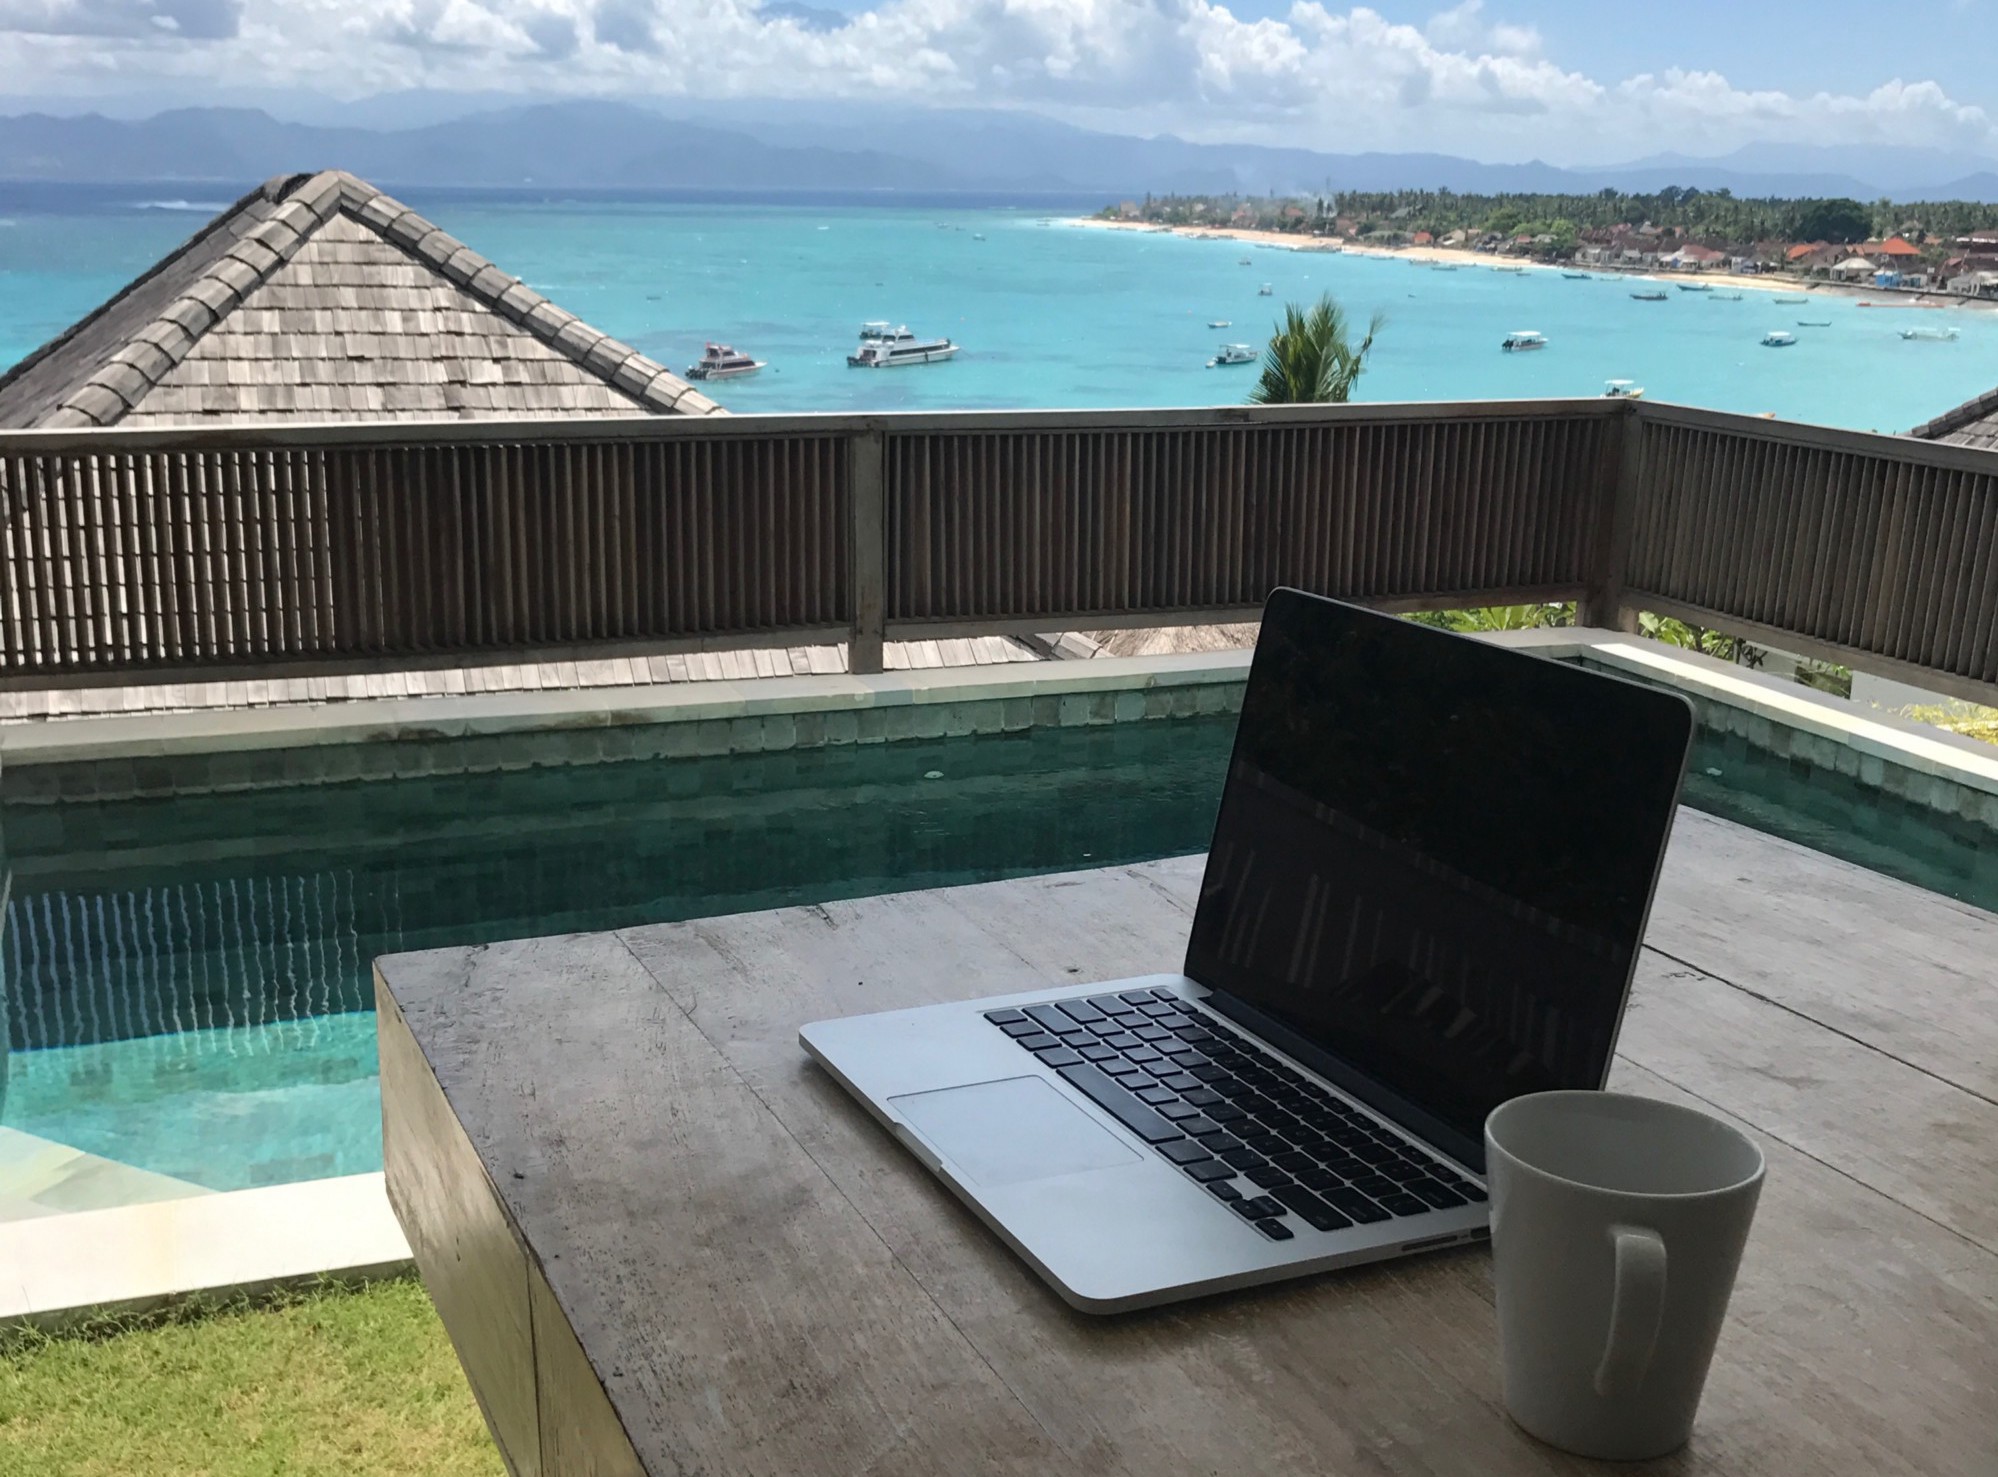 Want to become a Digital Nomad? Don’t Go to Bali.